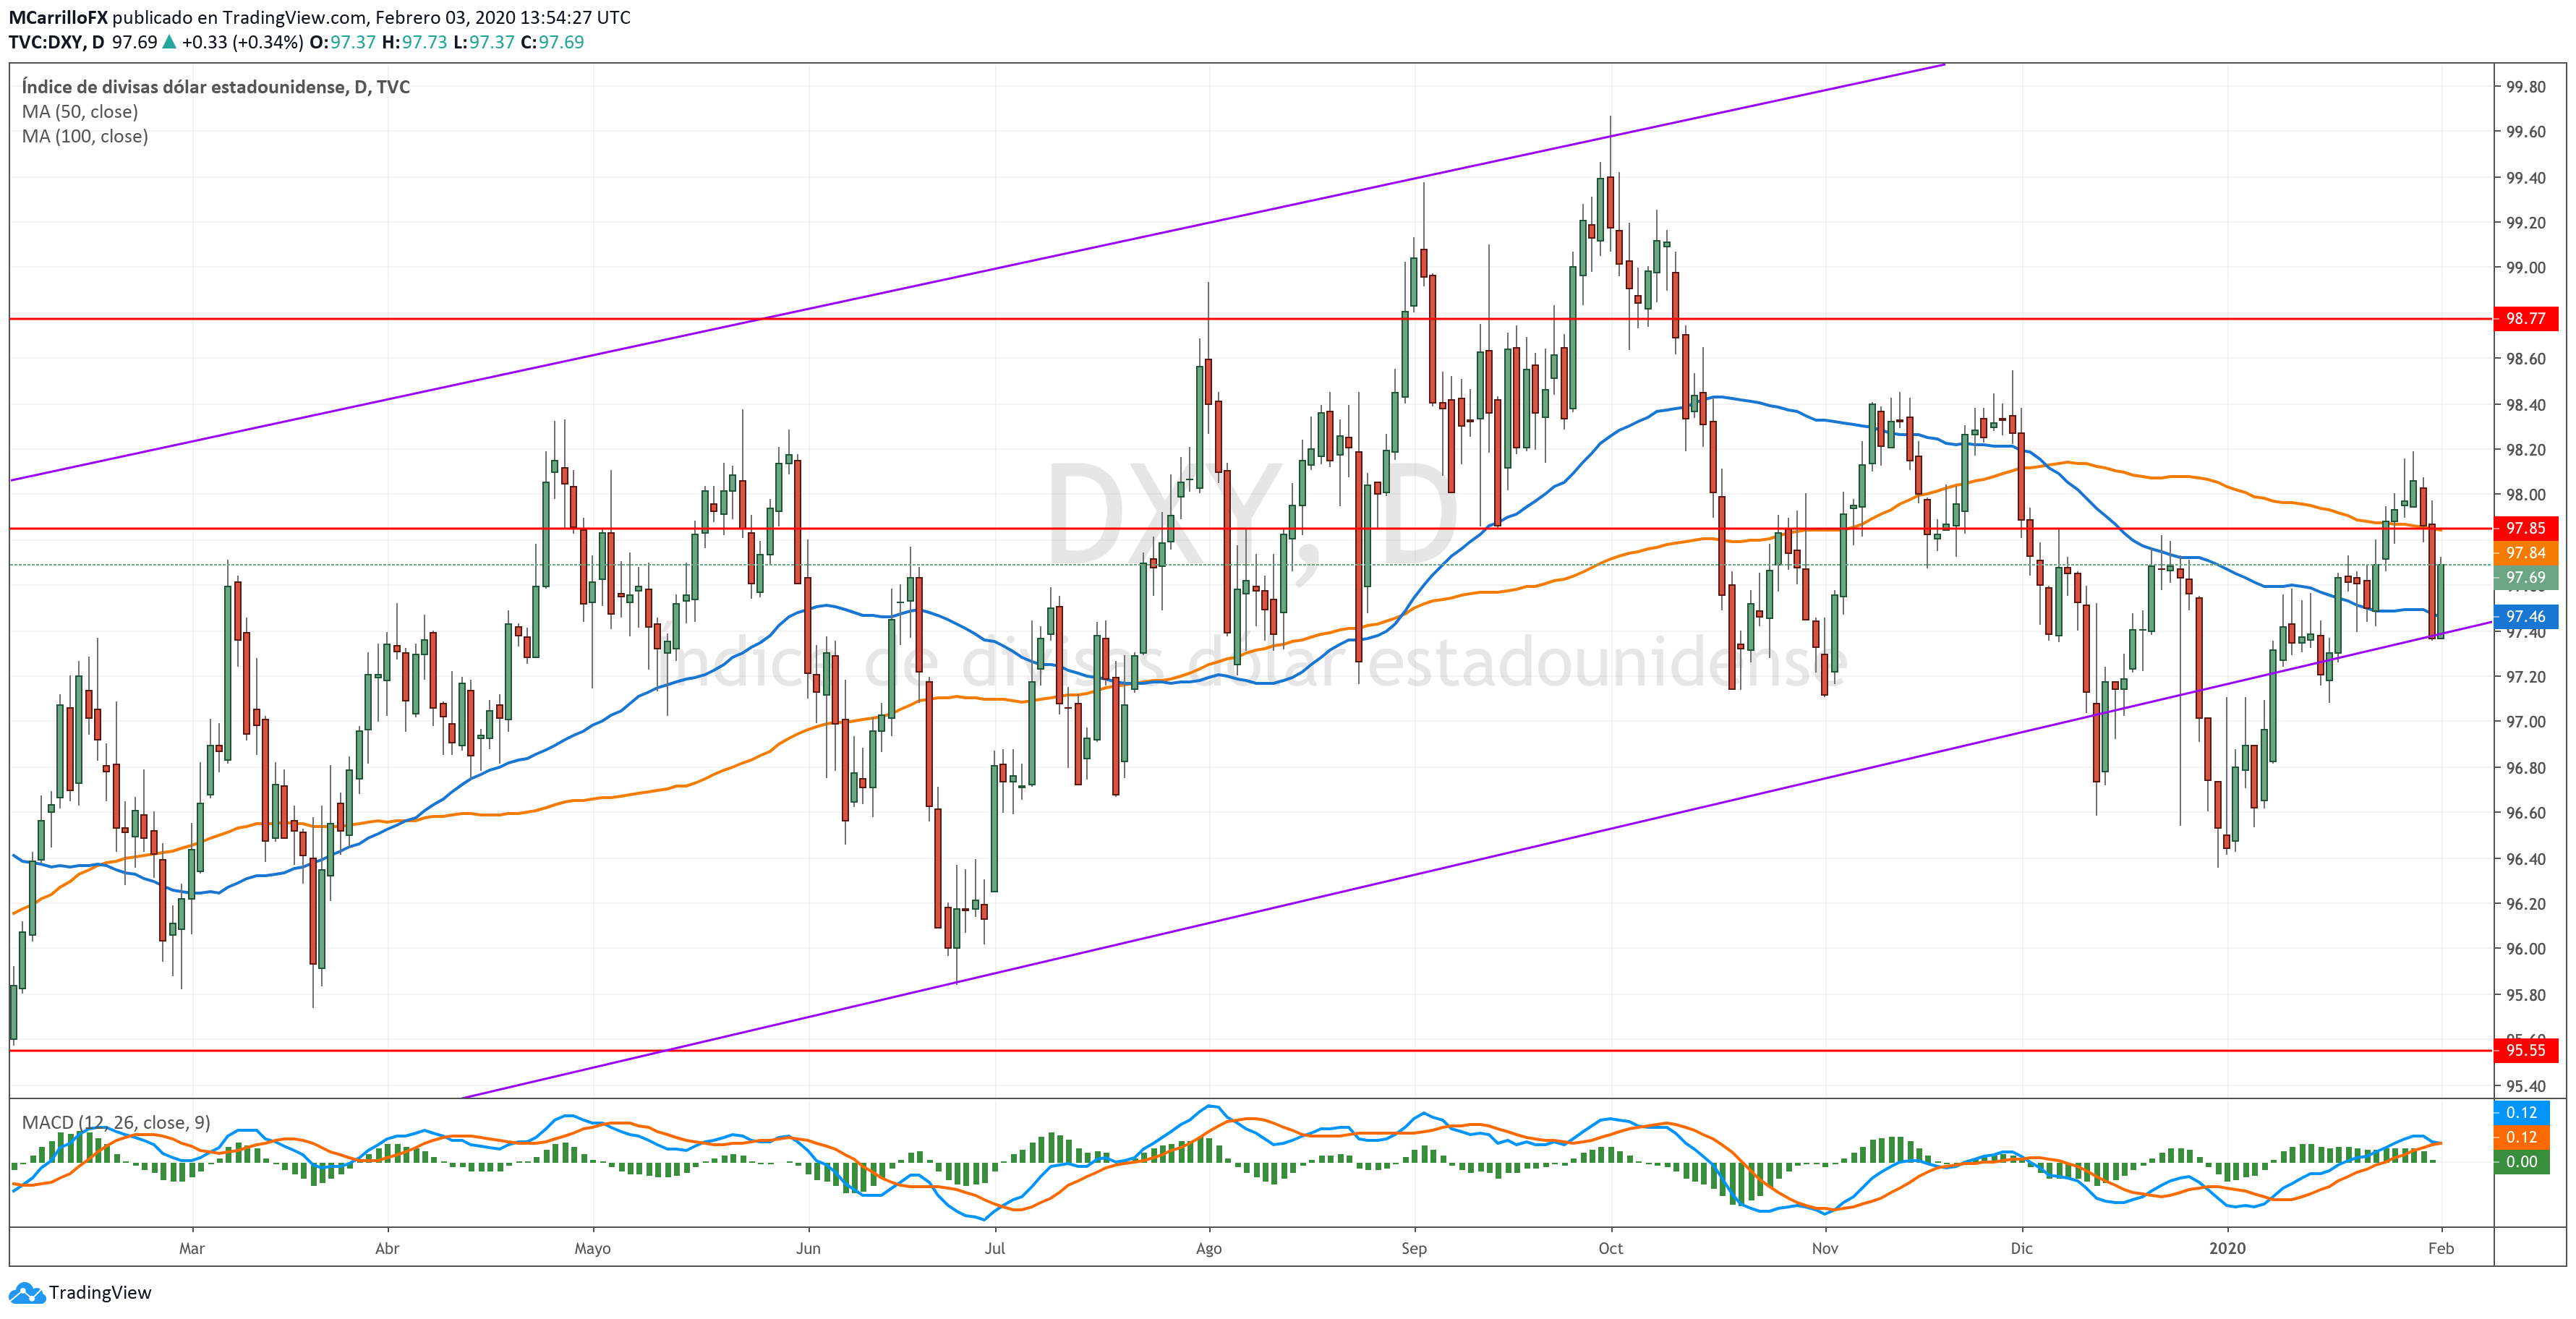 DXY